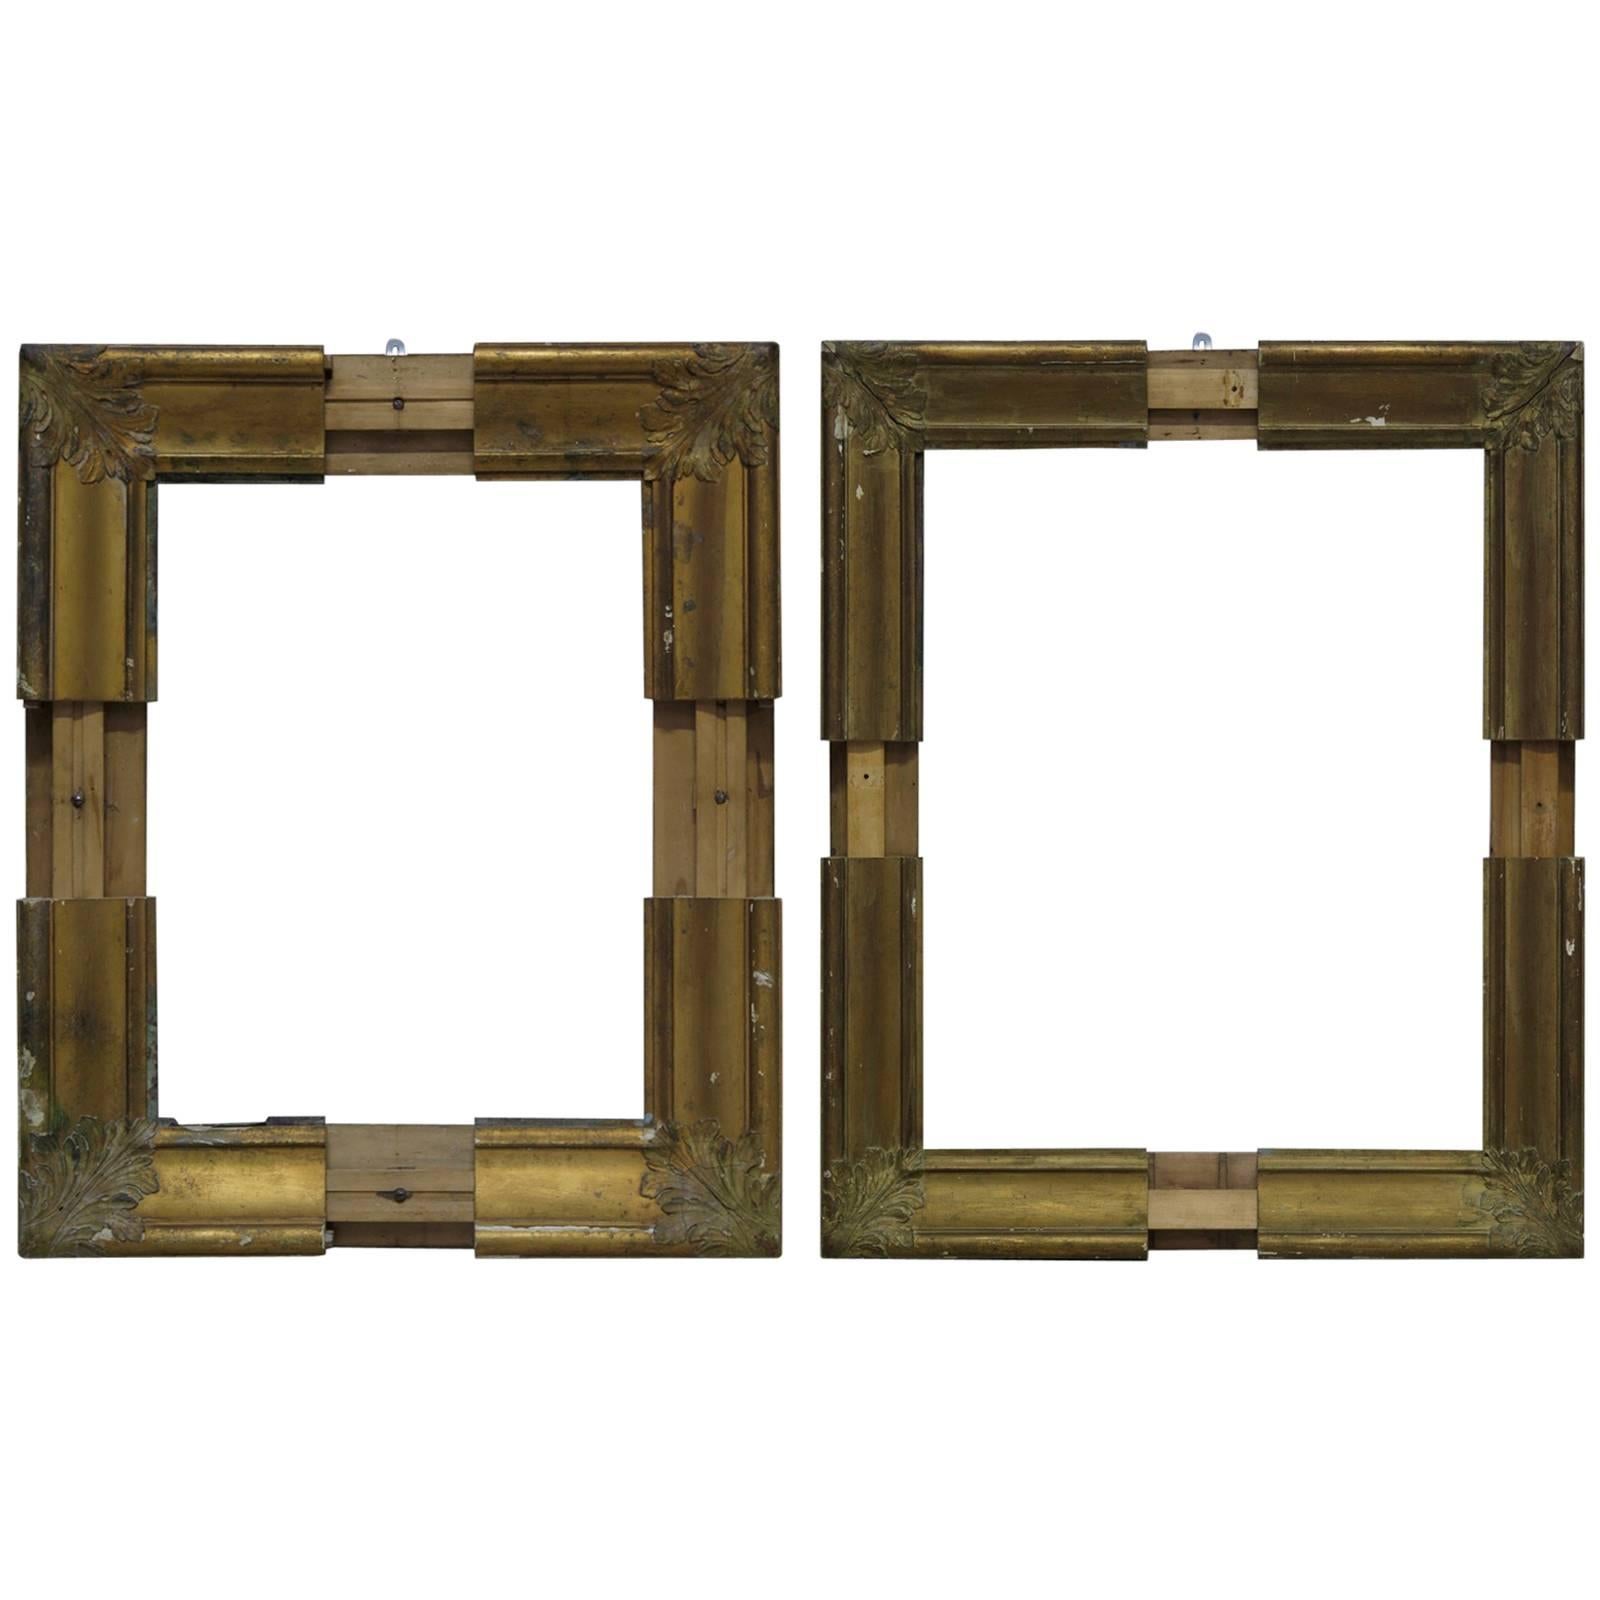 Curious Pair of Adjustable Frames, France, 19th Century